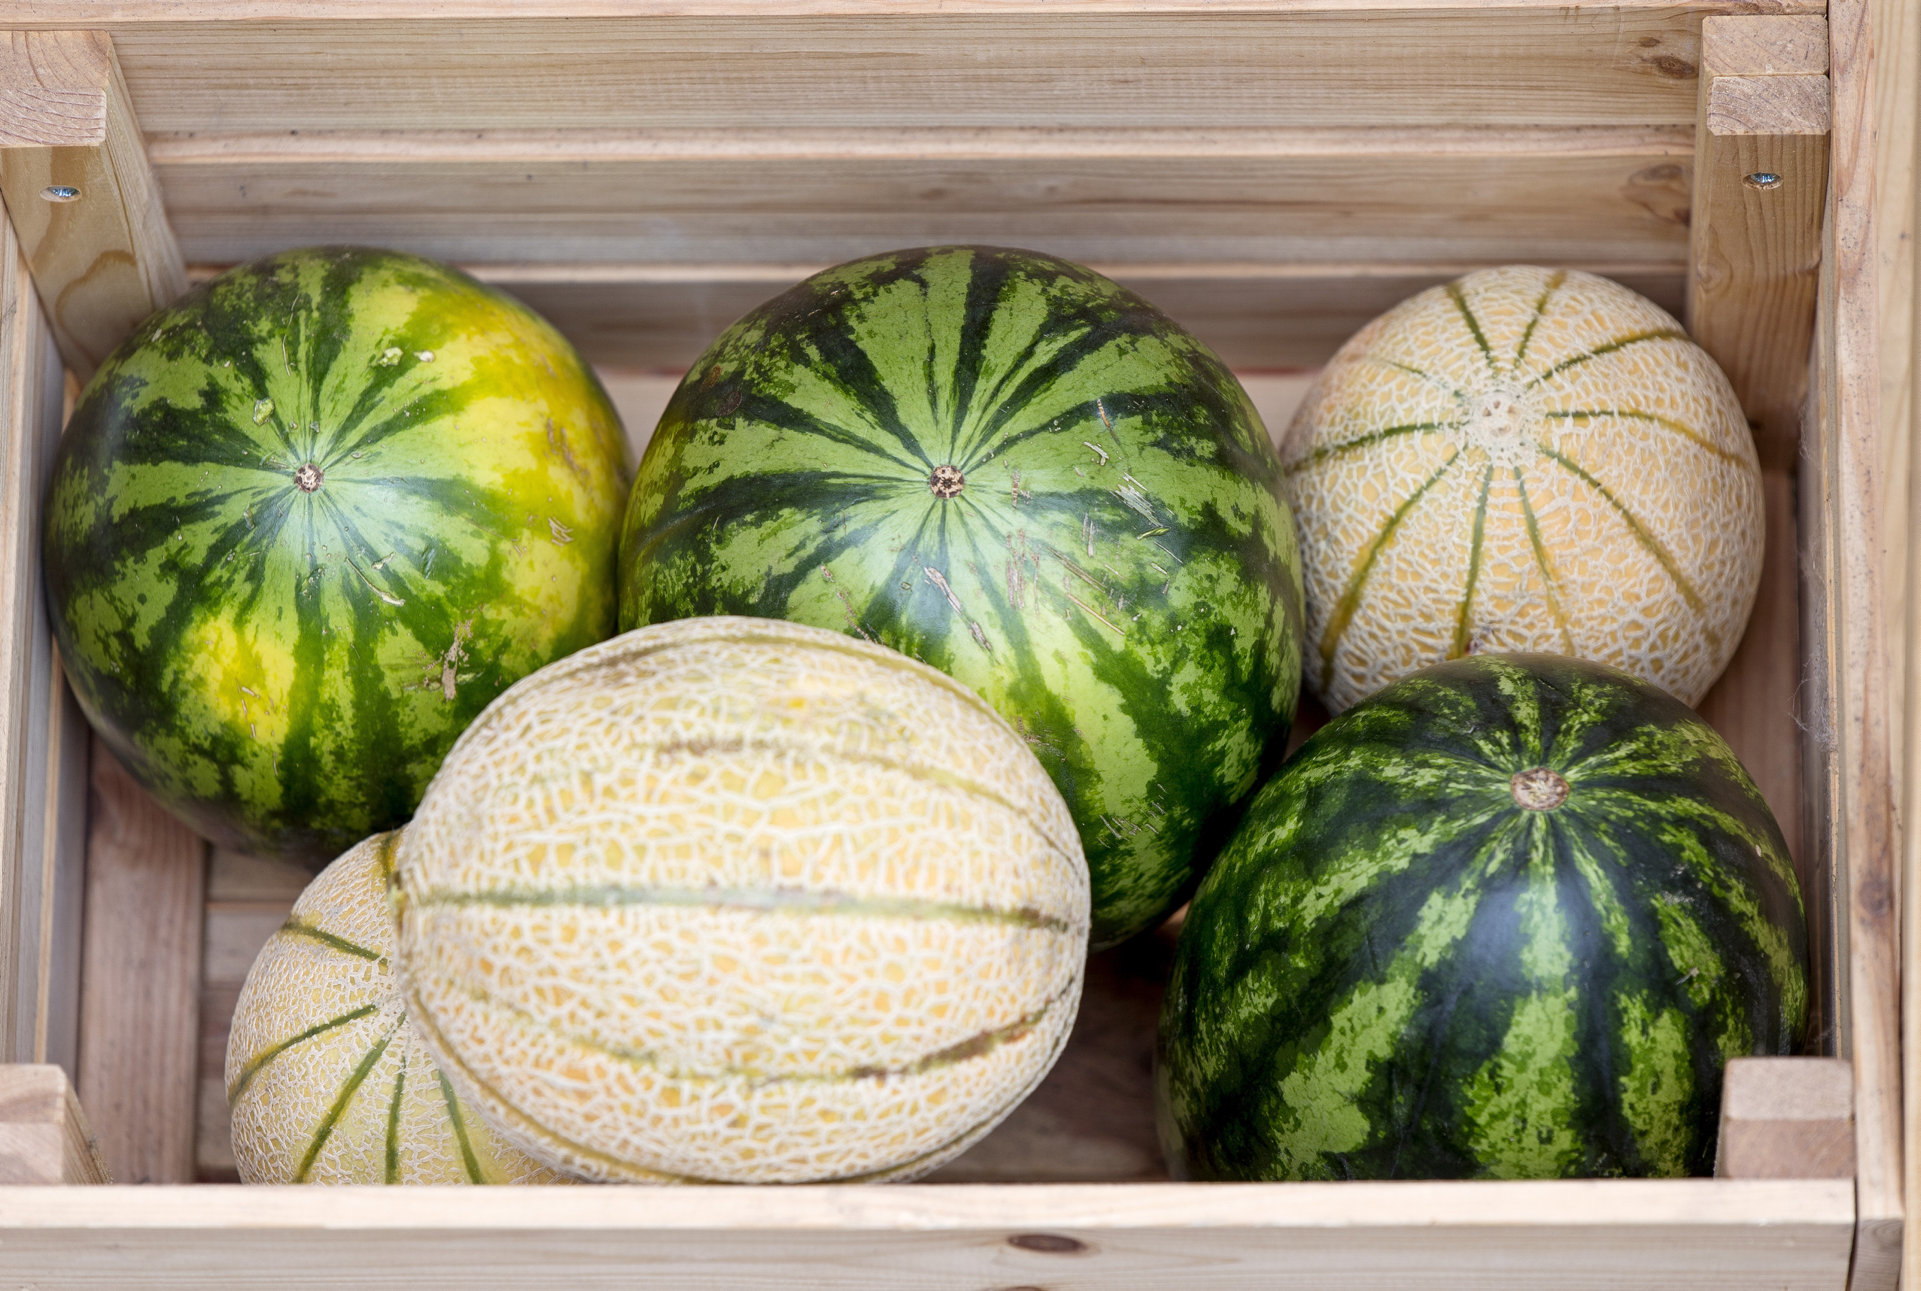 Supermarkets’ Unjustified Price-Cuts of Melons Could Destroy Domestic Producers